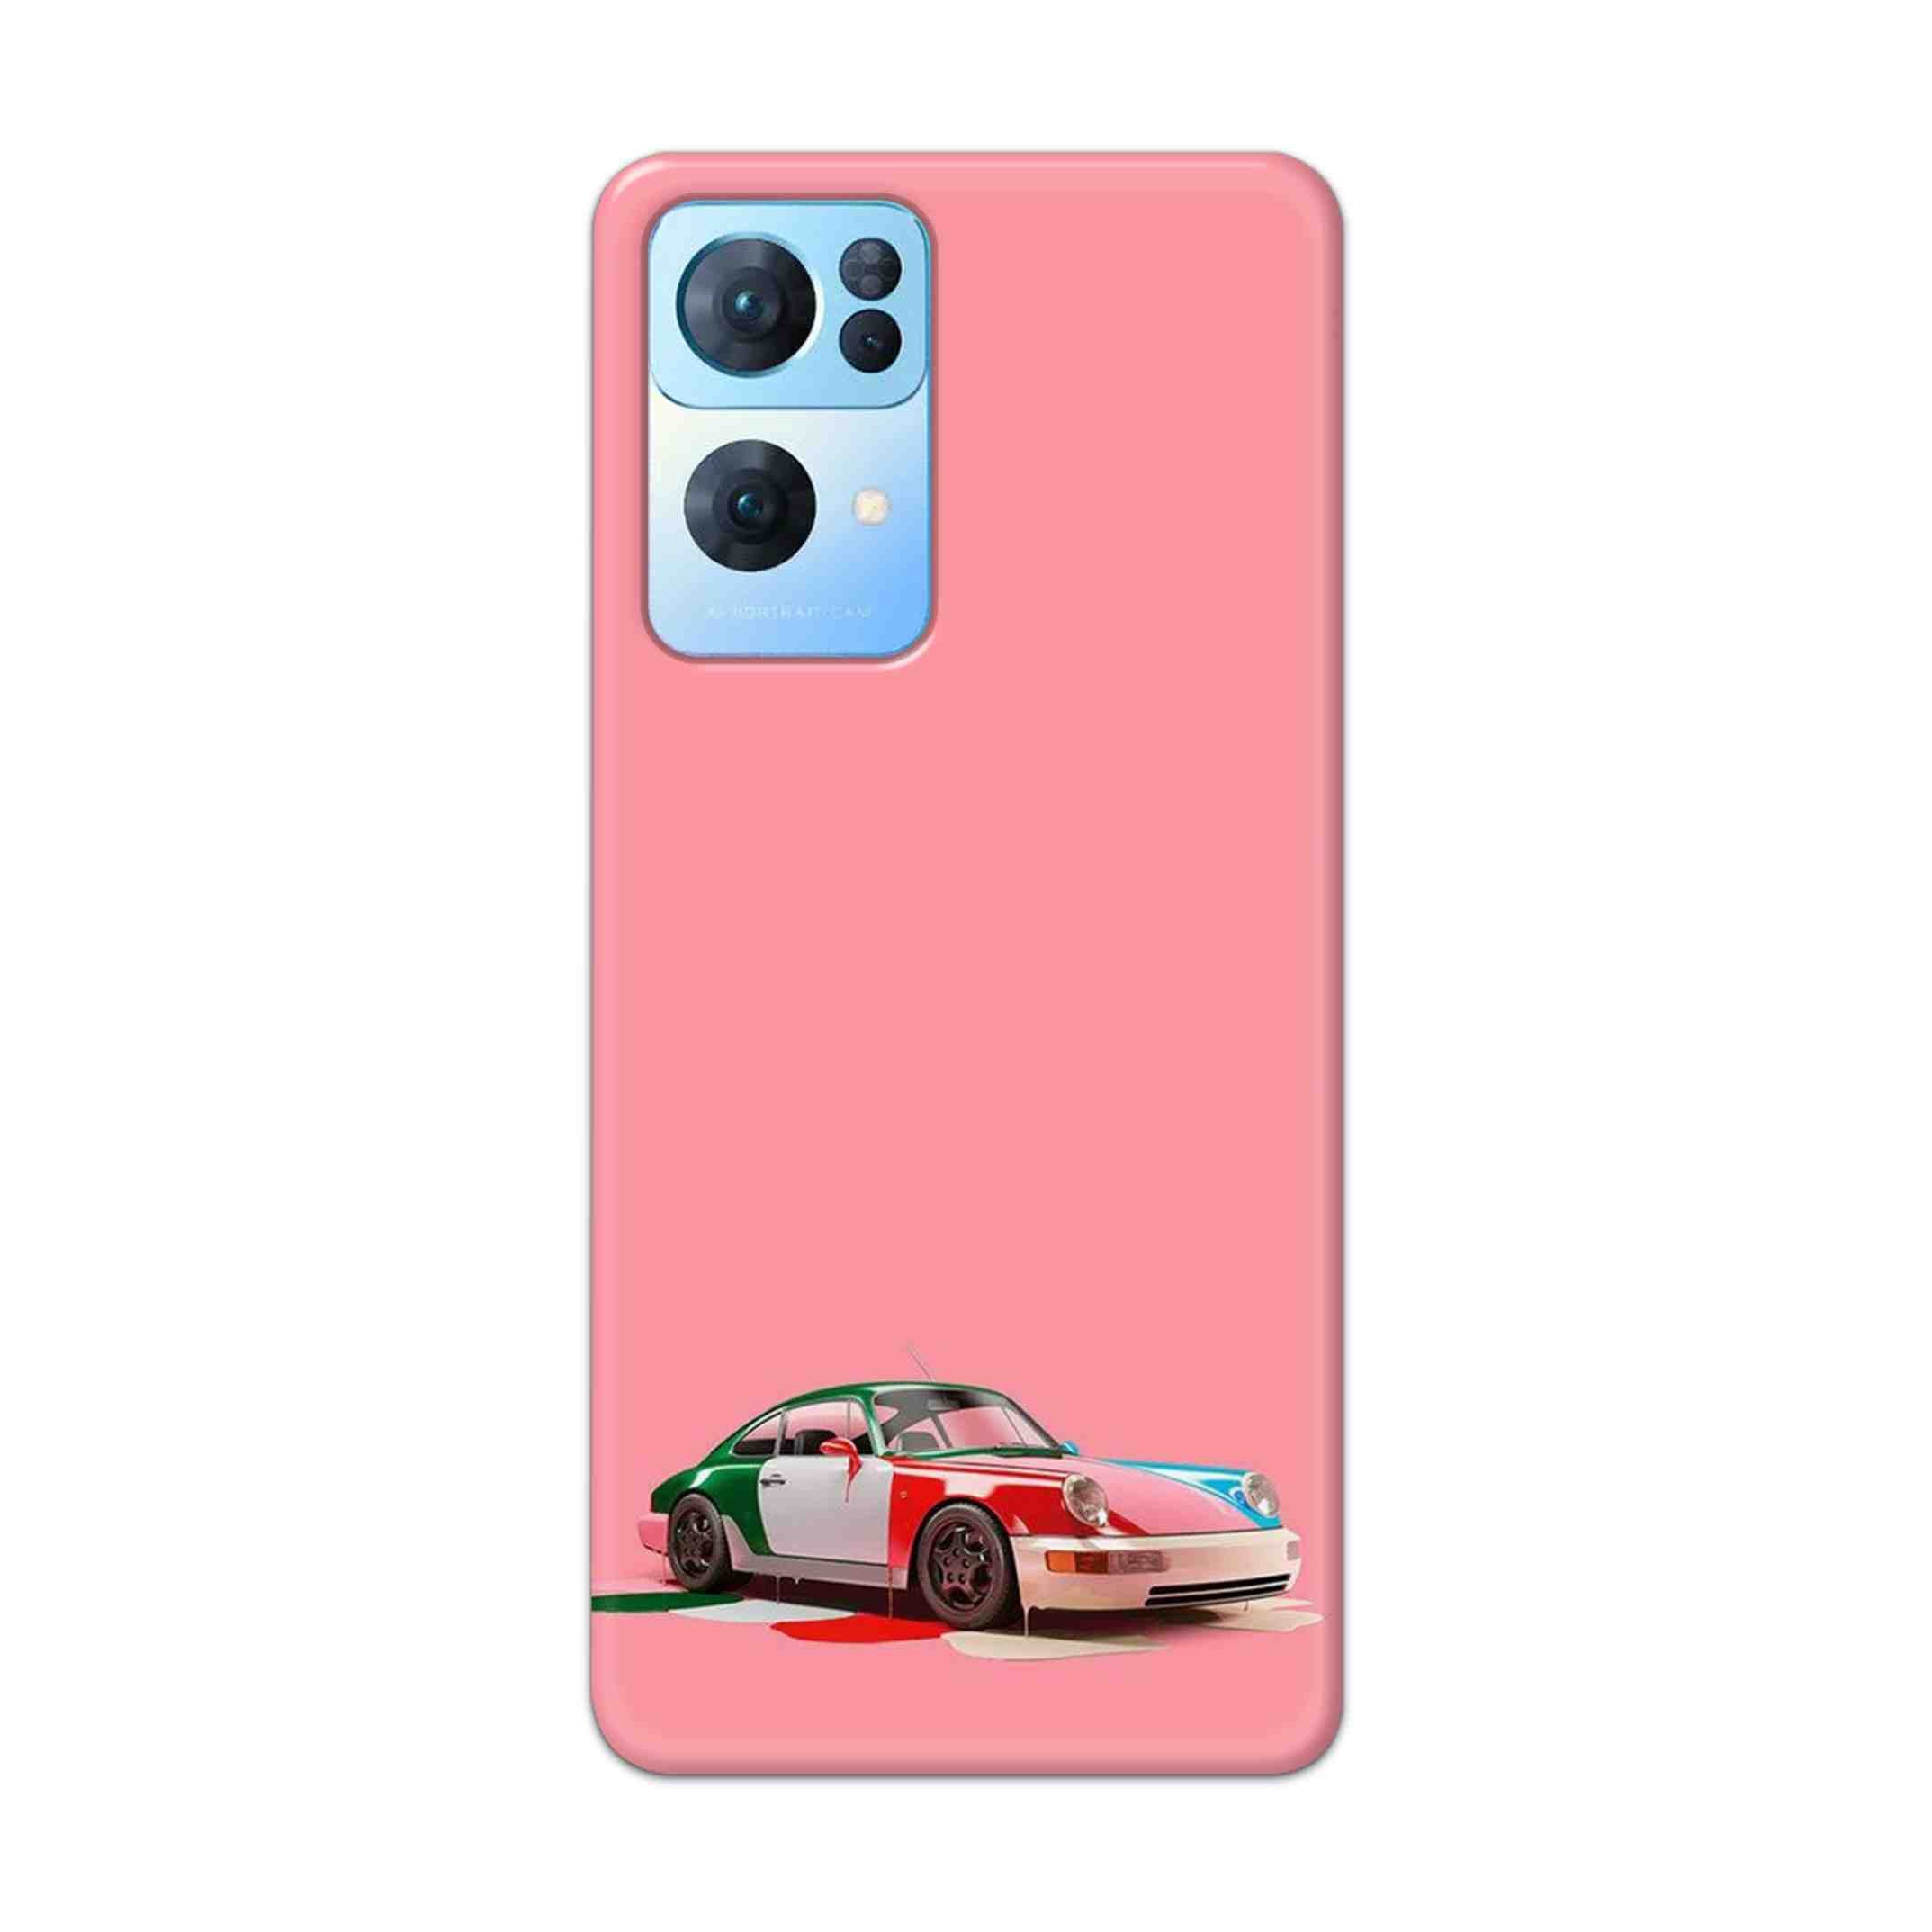 Buy Pink Porche Hard Back Mobile Phone Case Cover For Oppo Reno 7 Pro Online